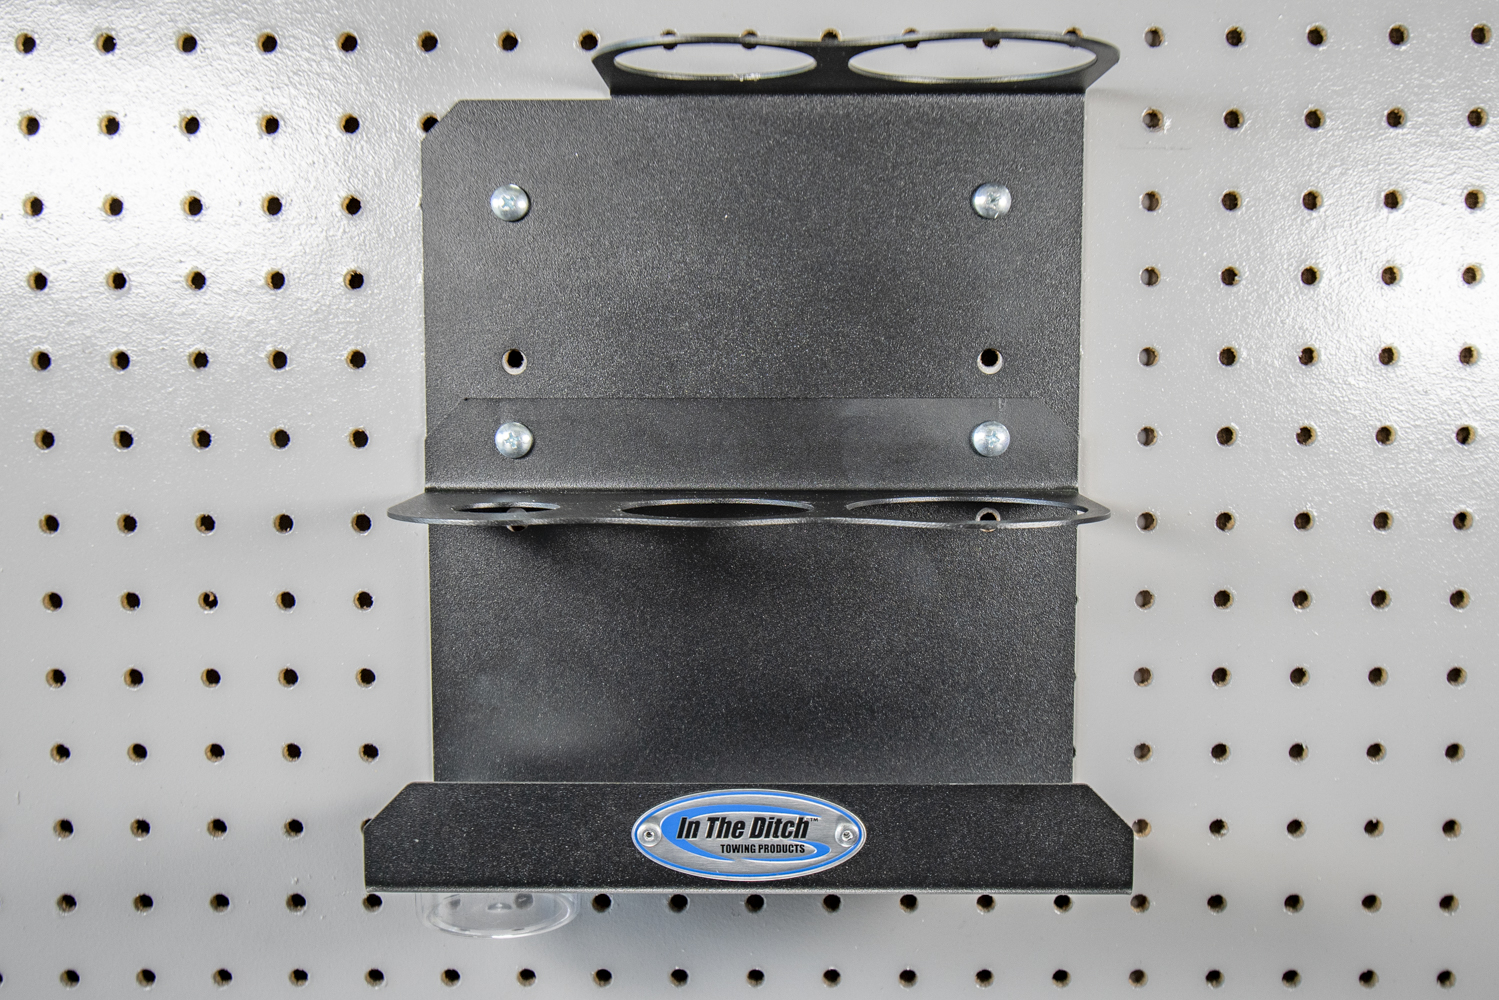 Grease Gun Holder Wall Mounted - In The Ditch Towing Products : In